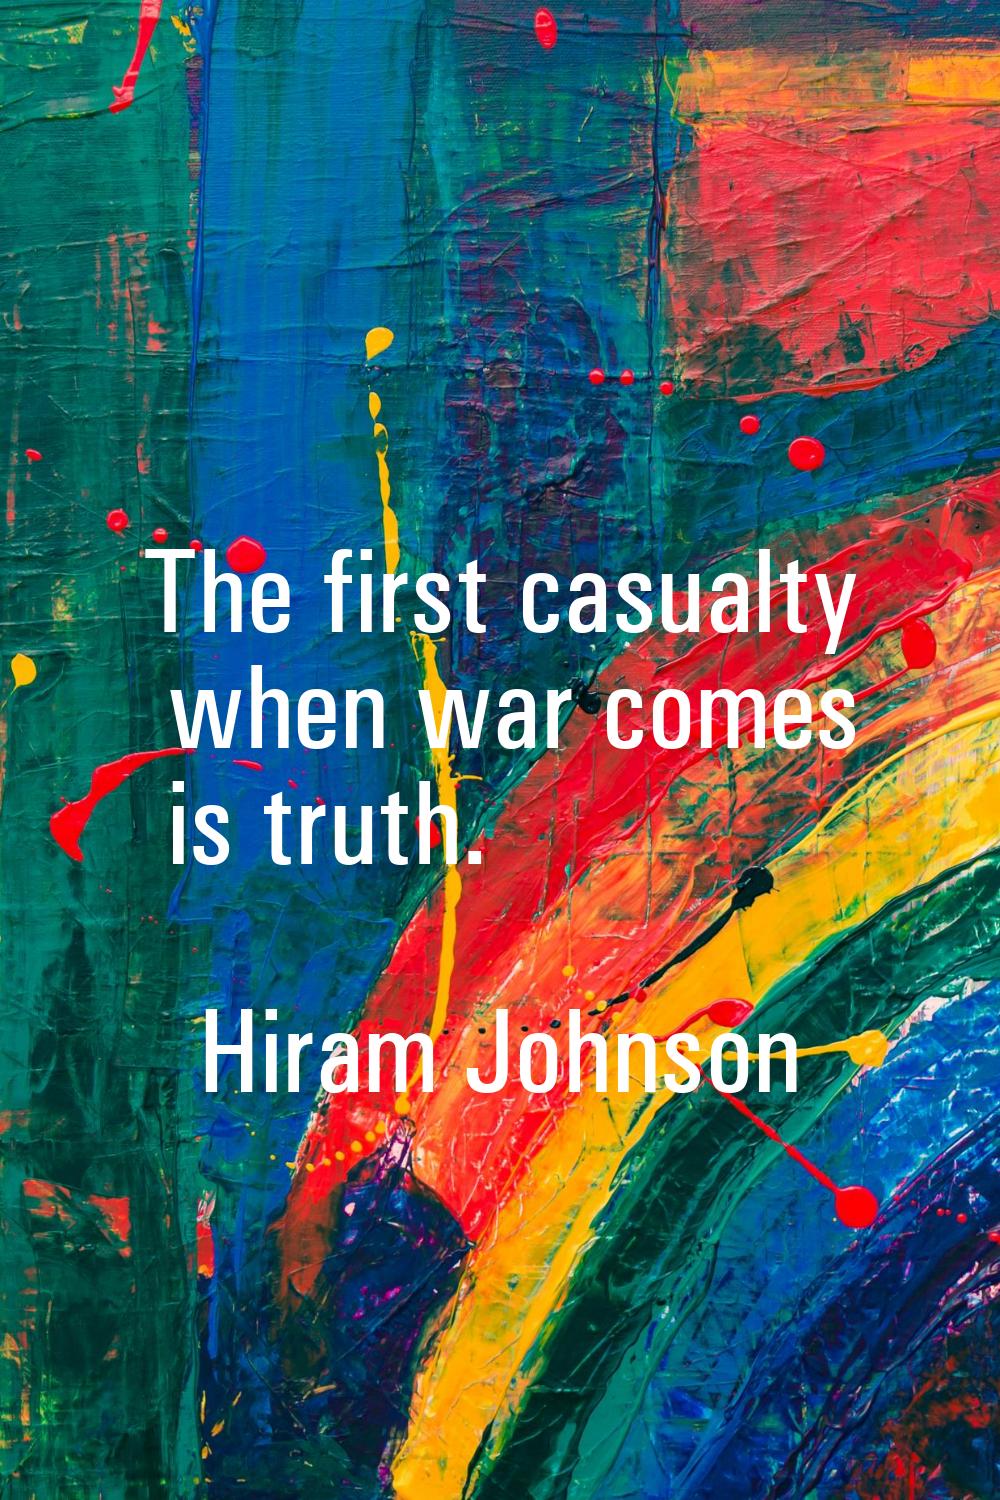 The first casualty when war comes is truth.